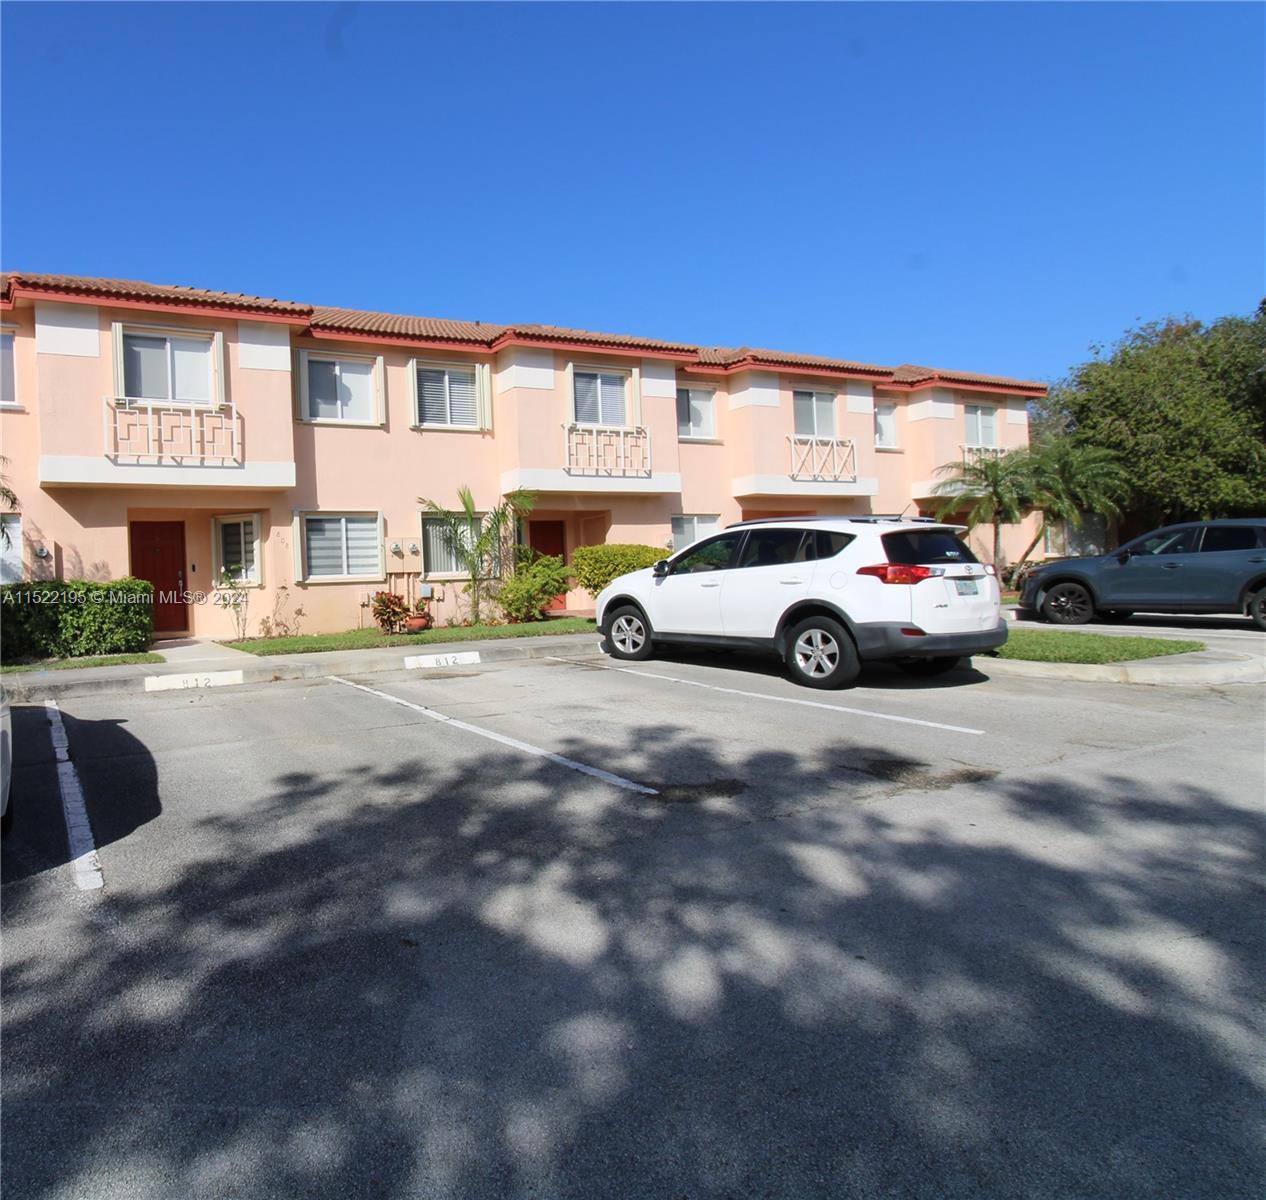 Photo of 812 NW 208th Cir in Pembroke Pines, FL